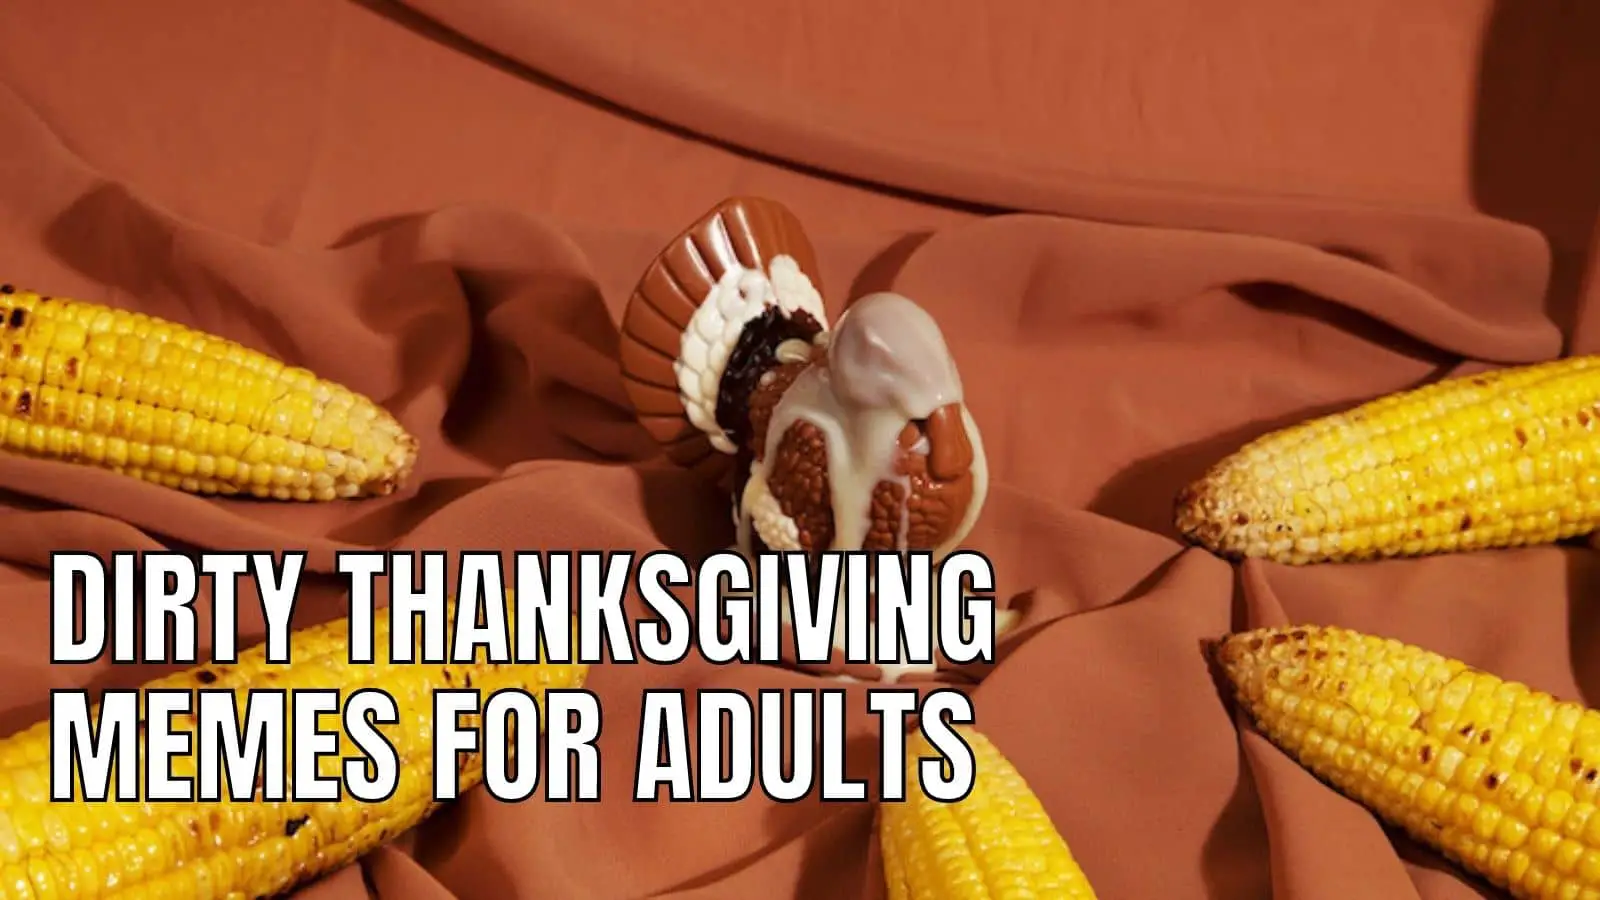 20 Dirty Thanksgiving Memes For Adults In 2022 - HumorNama